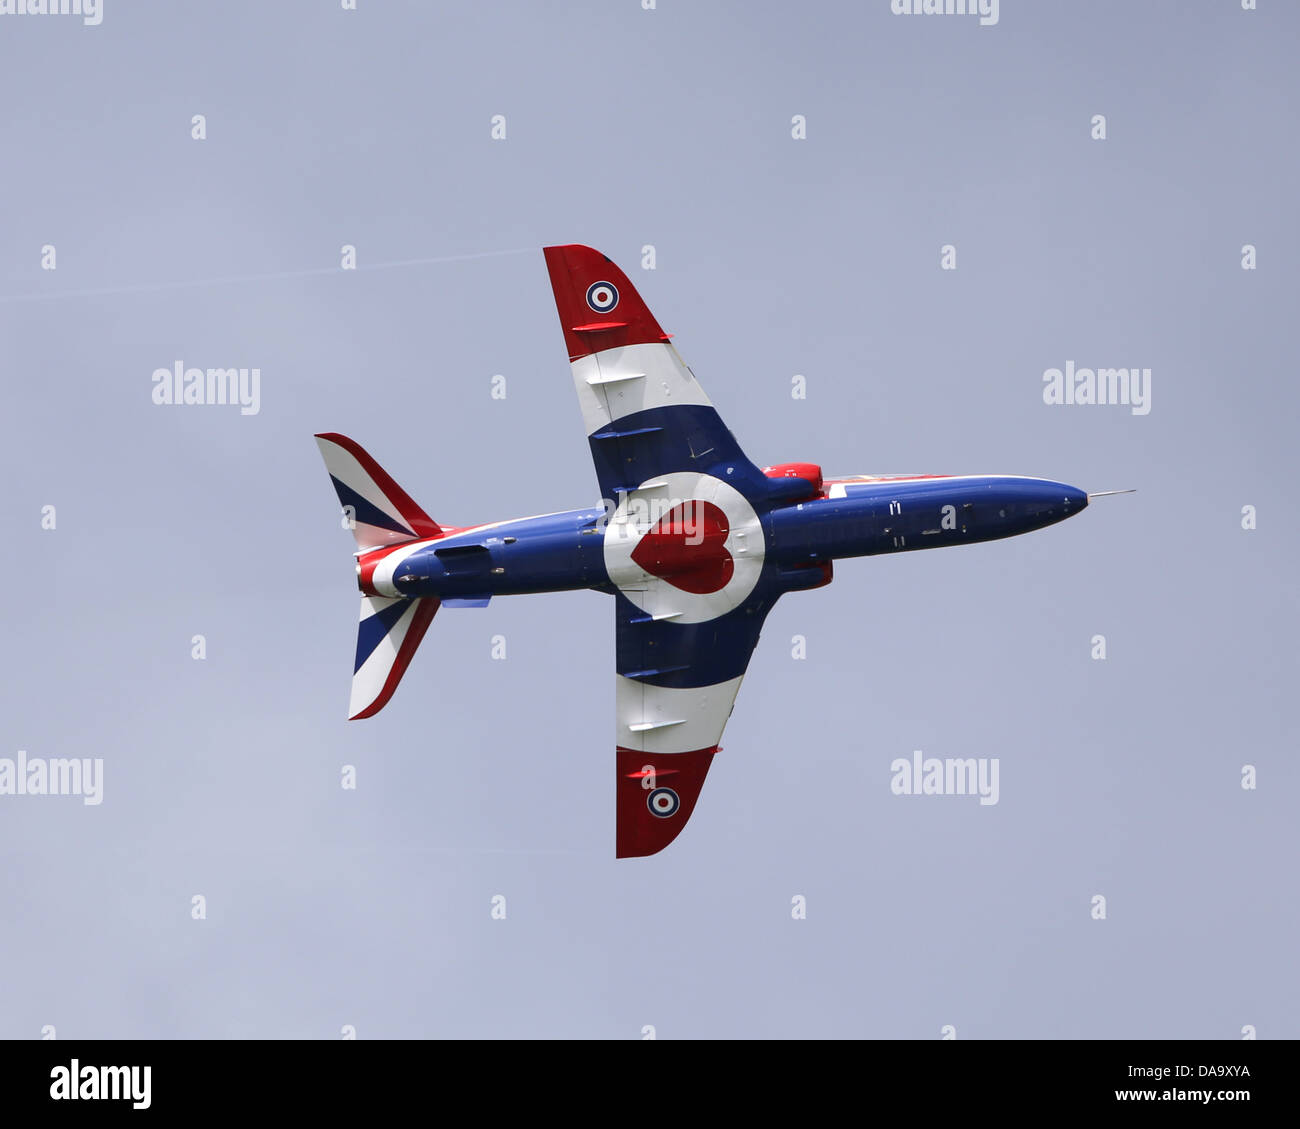 A BAE Hawk jet trainer in a special livery for the diamond jubilee of Queen Elizabeth II in 2012 Stock Photo